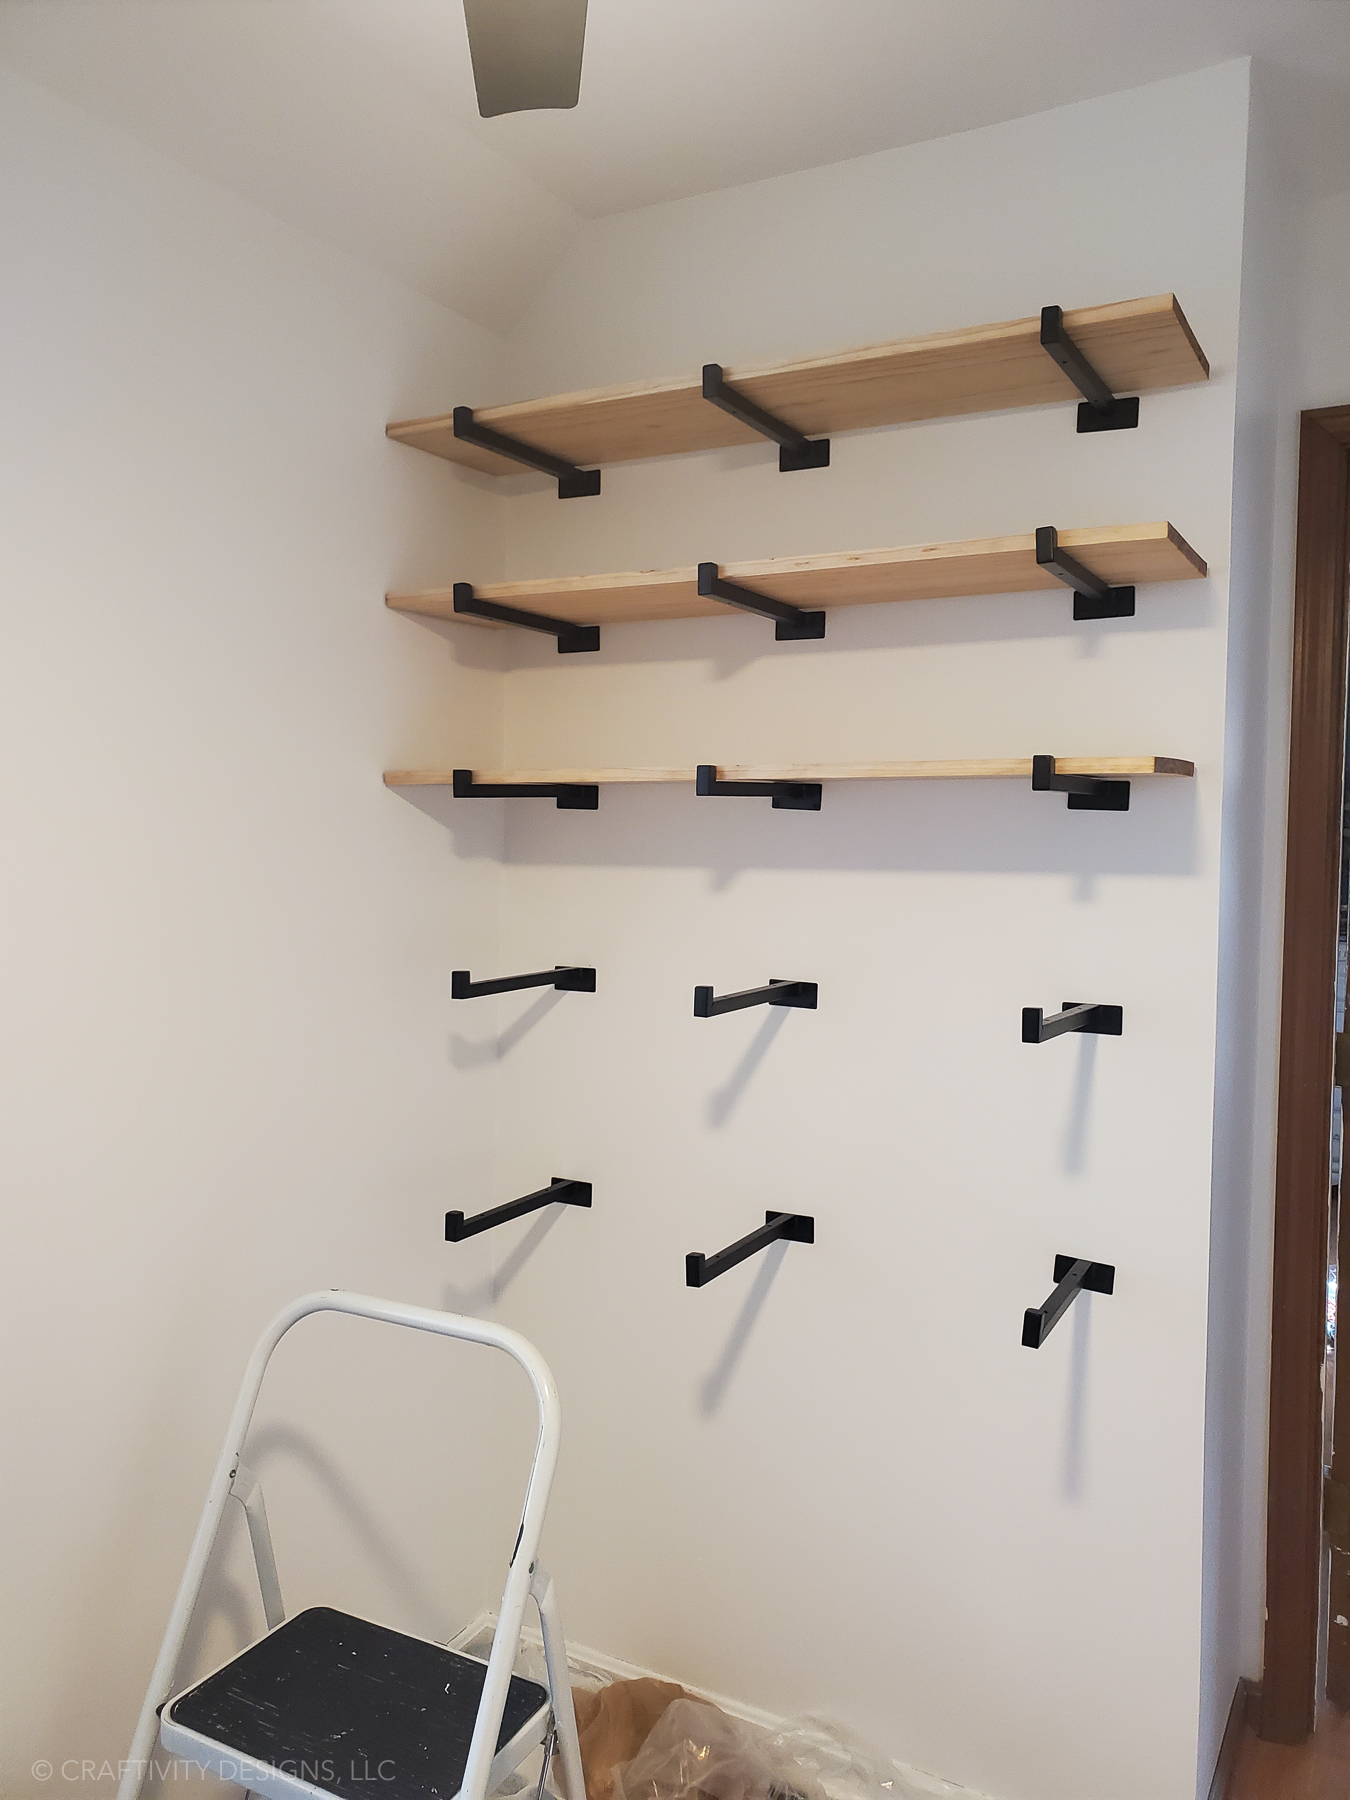 work from top to bottom when installing heavy duty shelf brackets for wall shelves for books